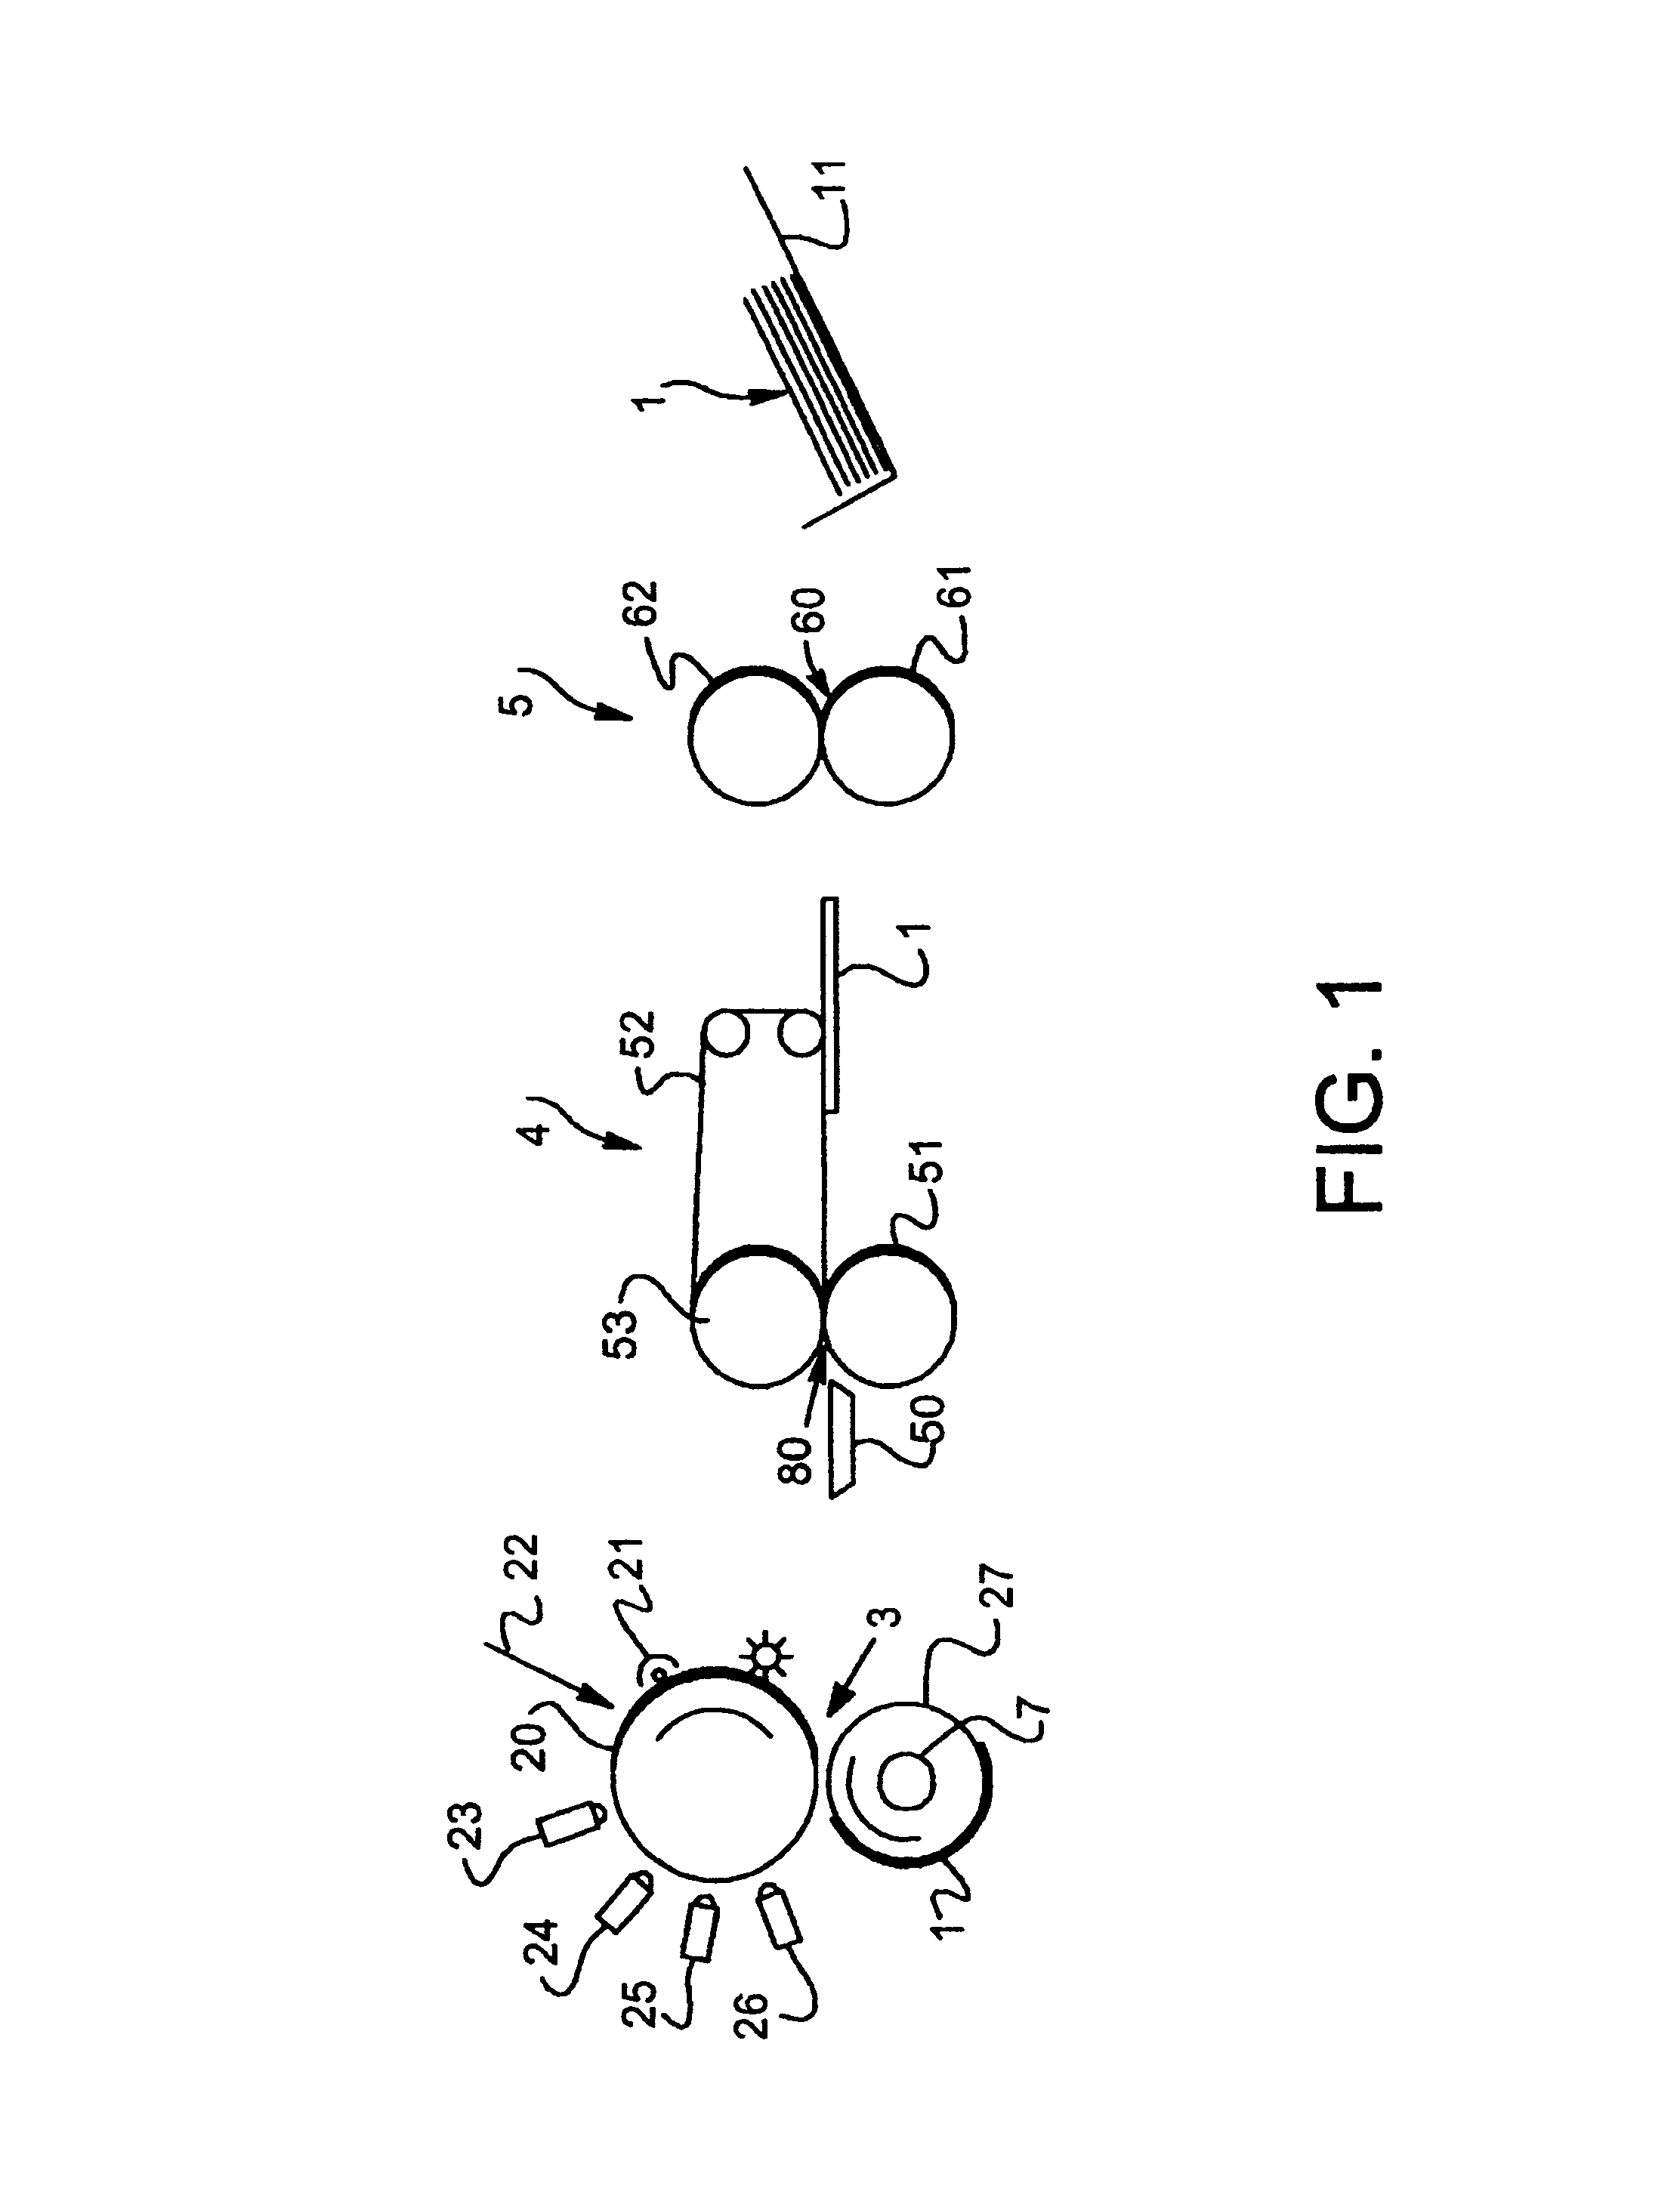 Fuser apparatus for adjusting gloss of a fused toner image and method for fusing a toner image to a receiver